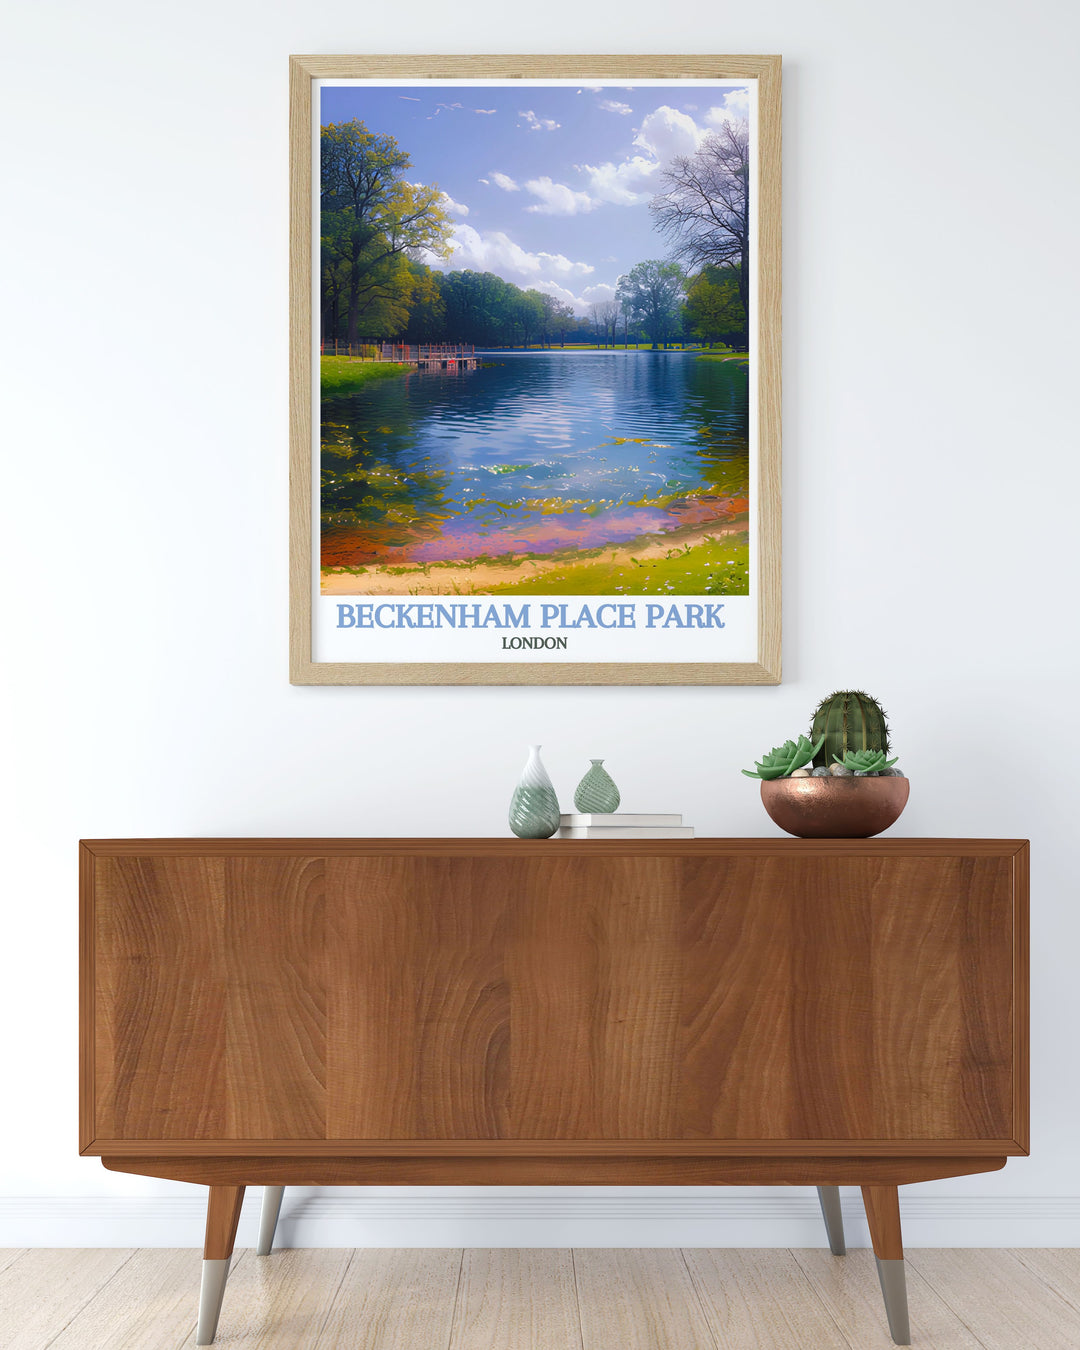 Add a contemporary touch to your home with our London Modern Wall Decor, featuring designs inspired by Beckenham Place Park. These pieces blend modern aesthetics with the parks natural beauty, offering a sophisticated and stylish addition to any room in your home or office.